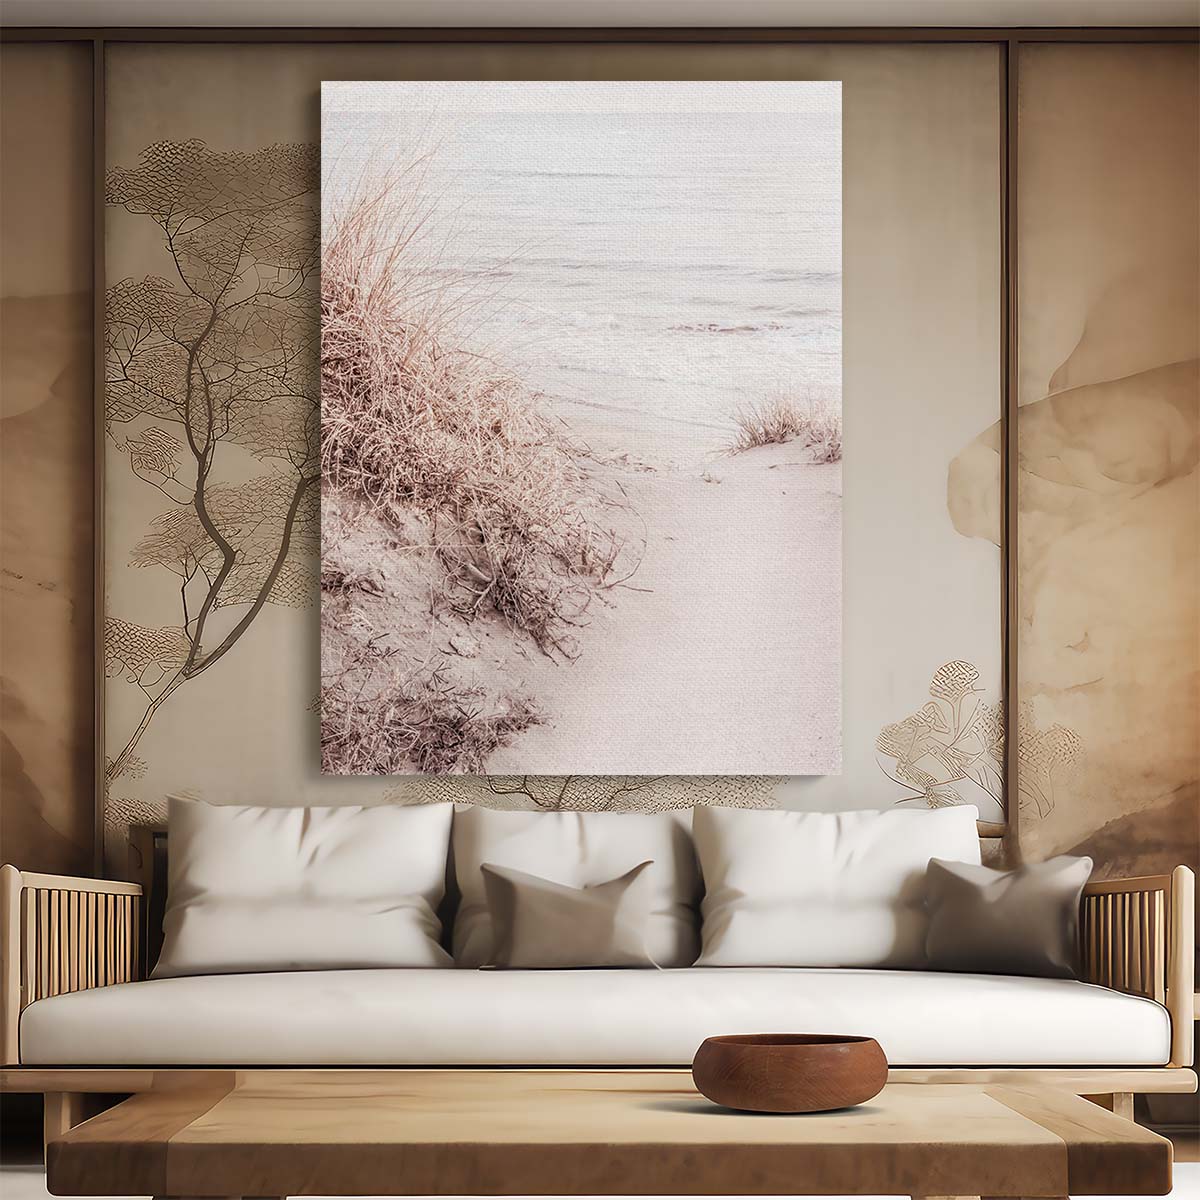 Coastal Beige Beach Sand Dunes Photography, Seascape Wall Art by Luxuriance Designs, made in USA